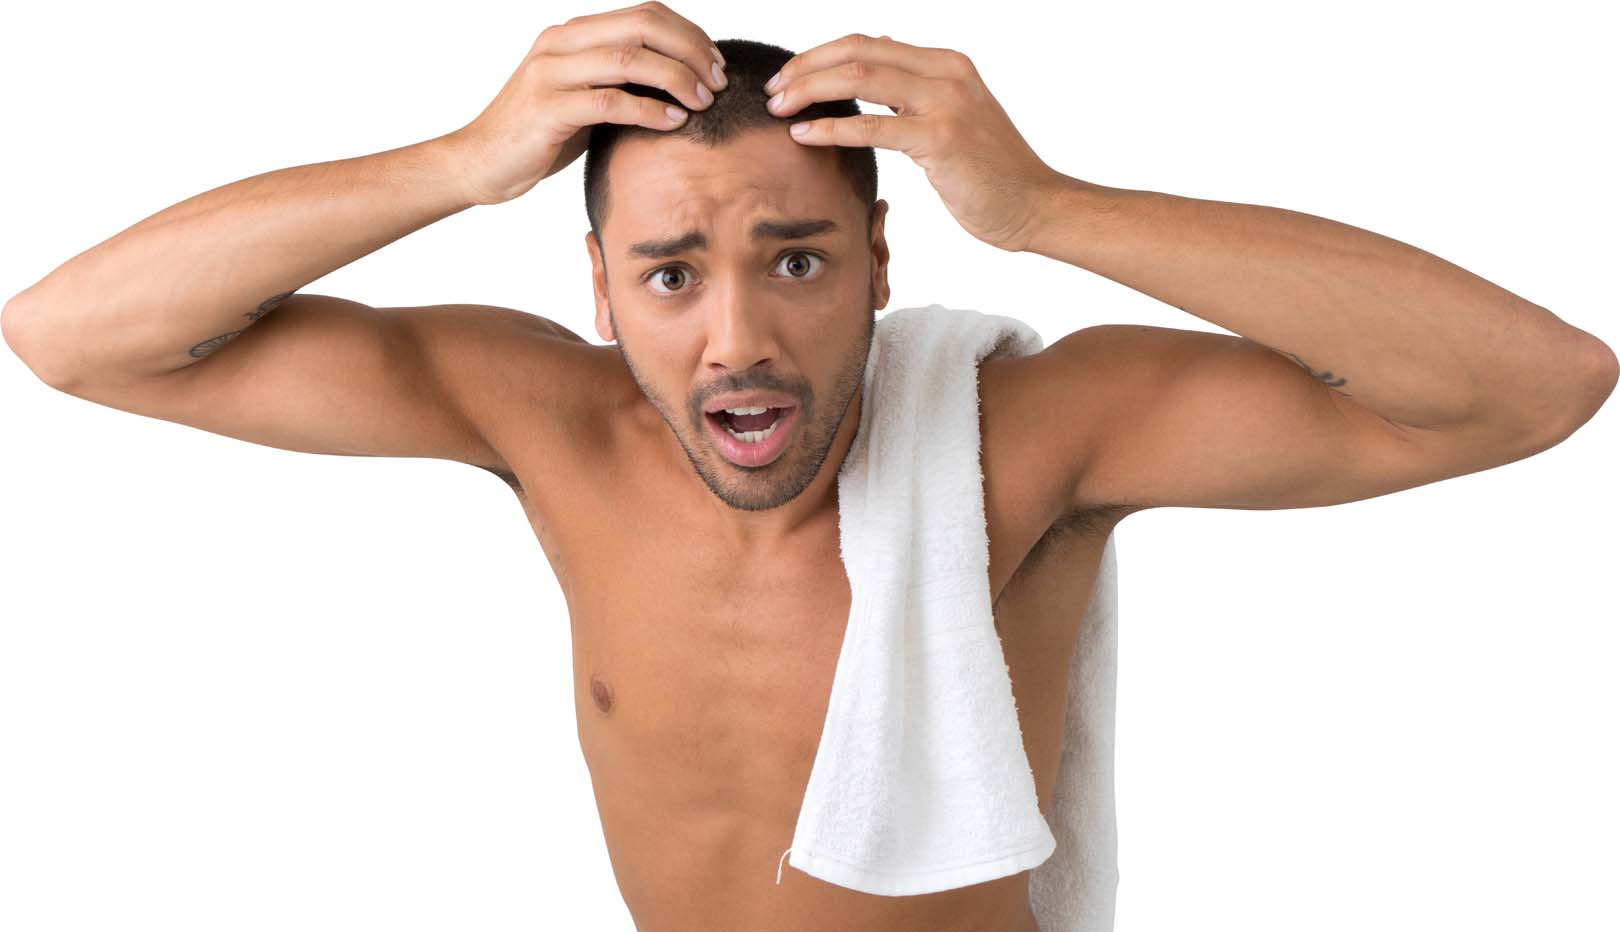 Stress causing baldness is a myth unless your pulling it out